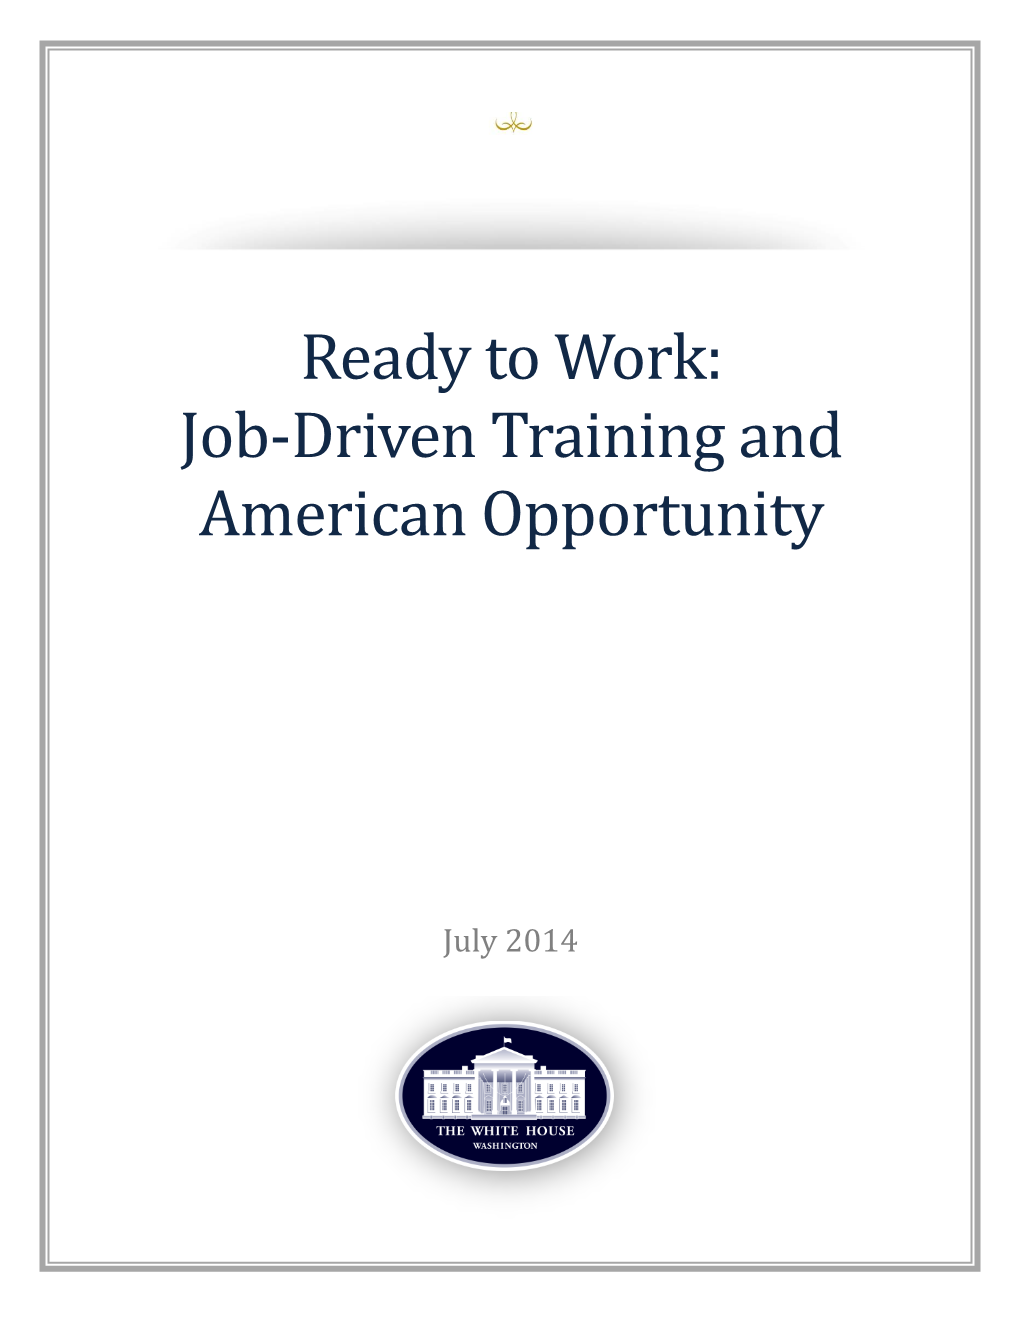 Job-Driven Training and American Opportunity